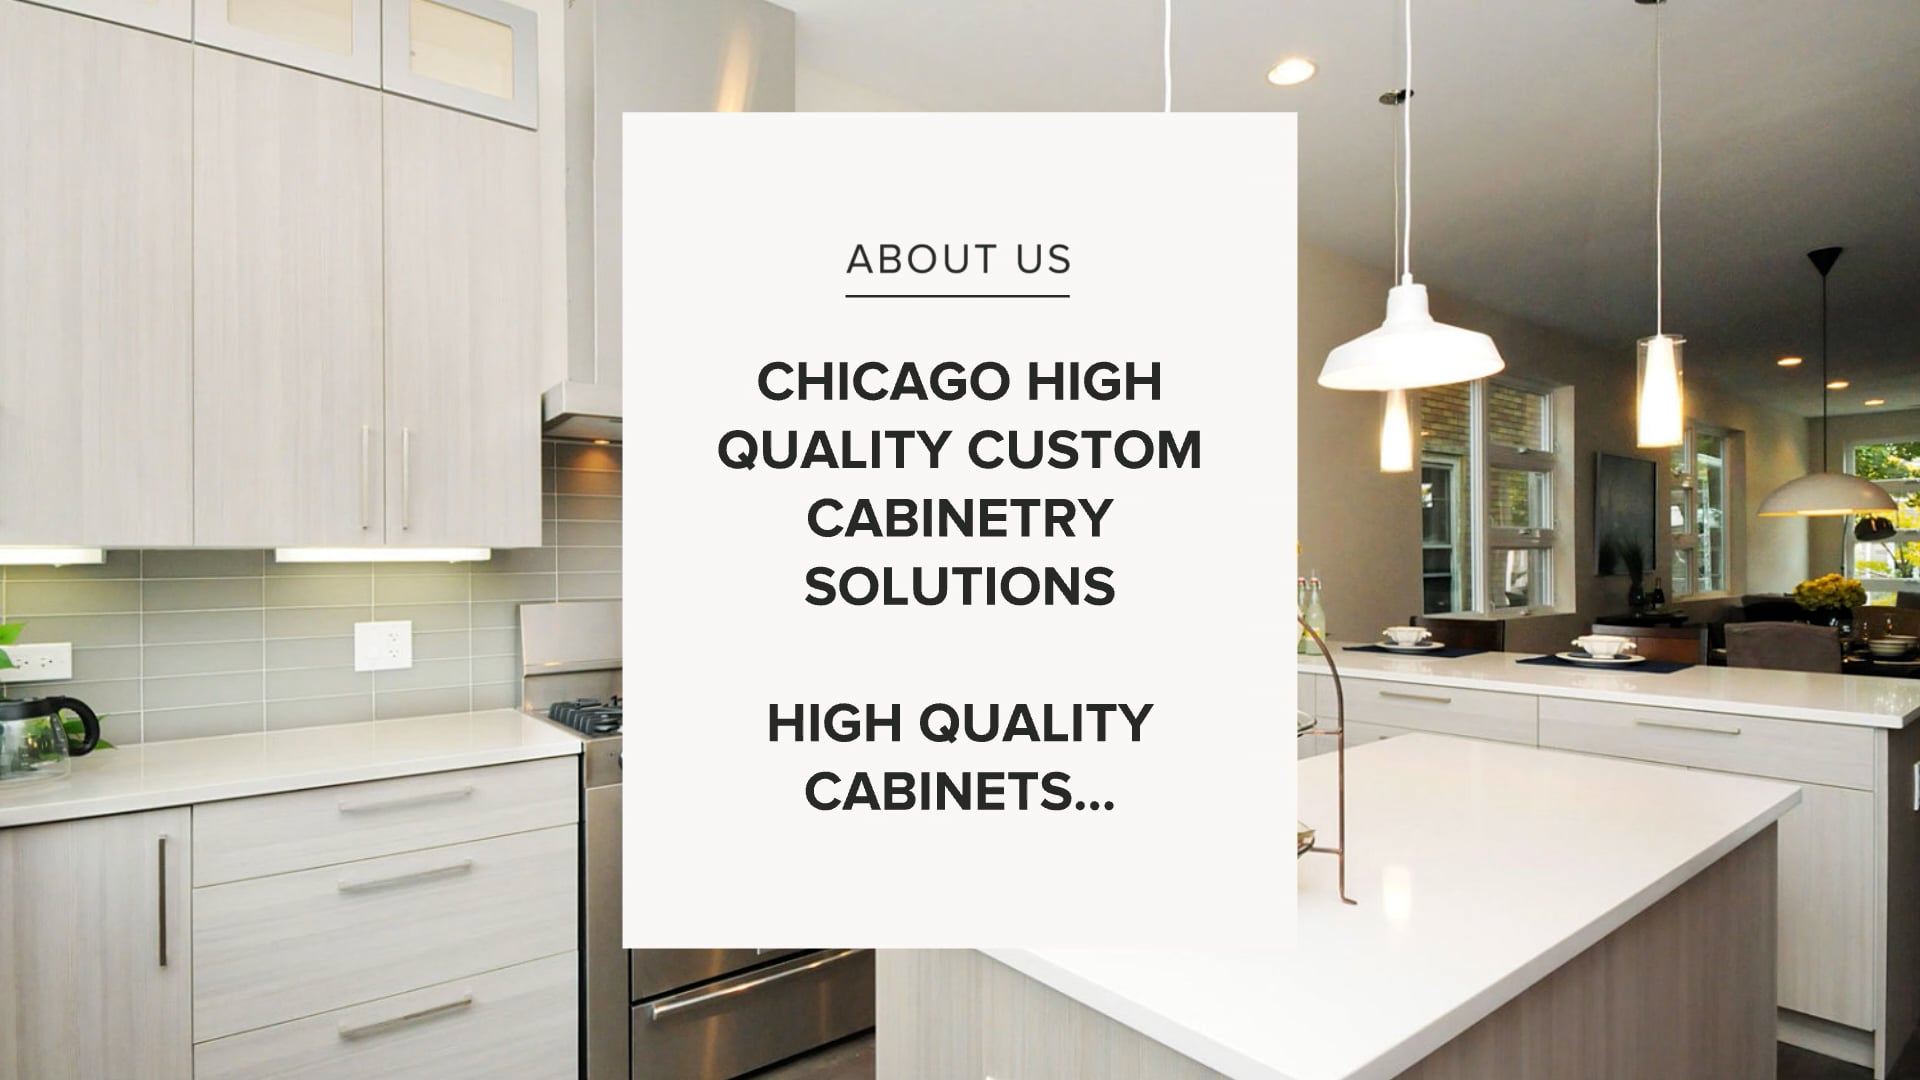 Cabinetry Hardware: What You Need to Know about Style, Finish, and  Placement of Cabinet Knobs and Pulls - Dura Supreme Cabinetry